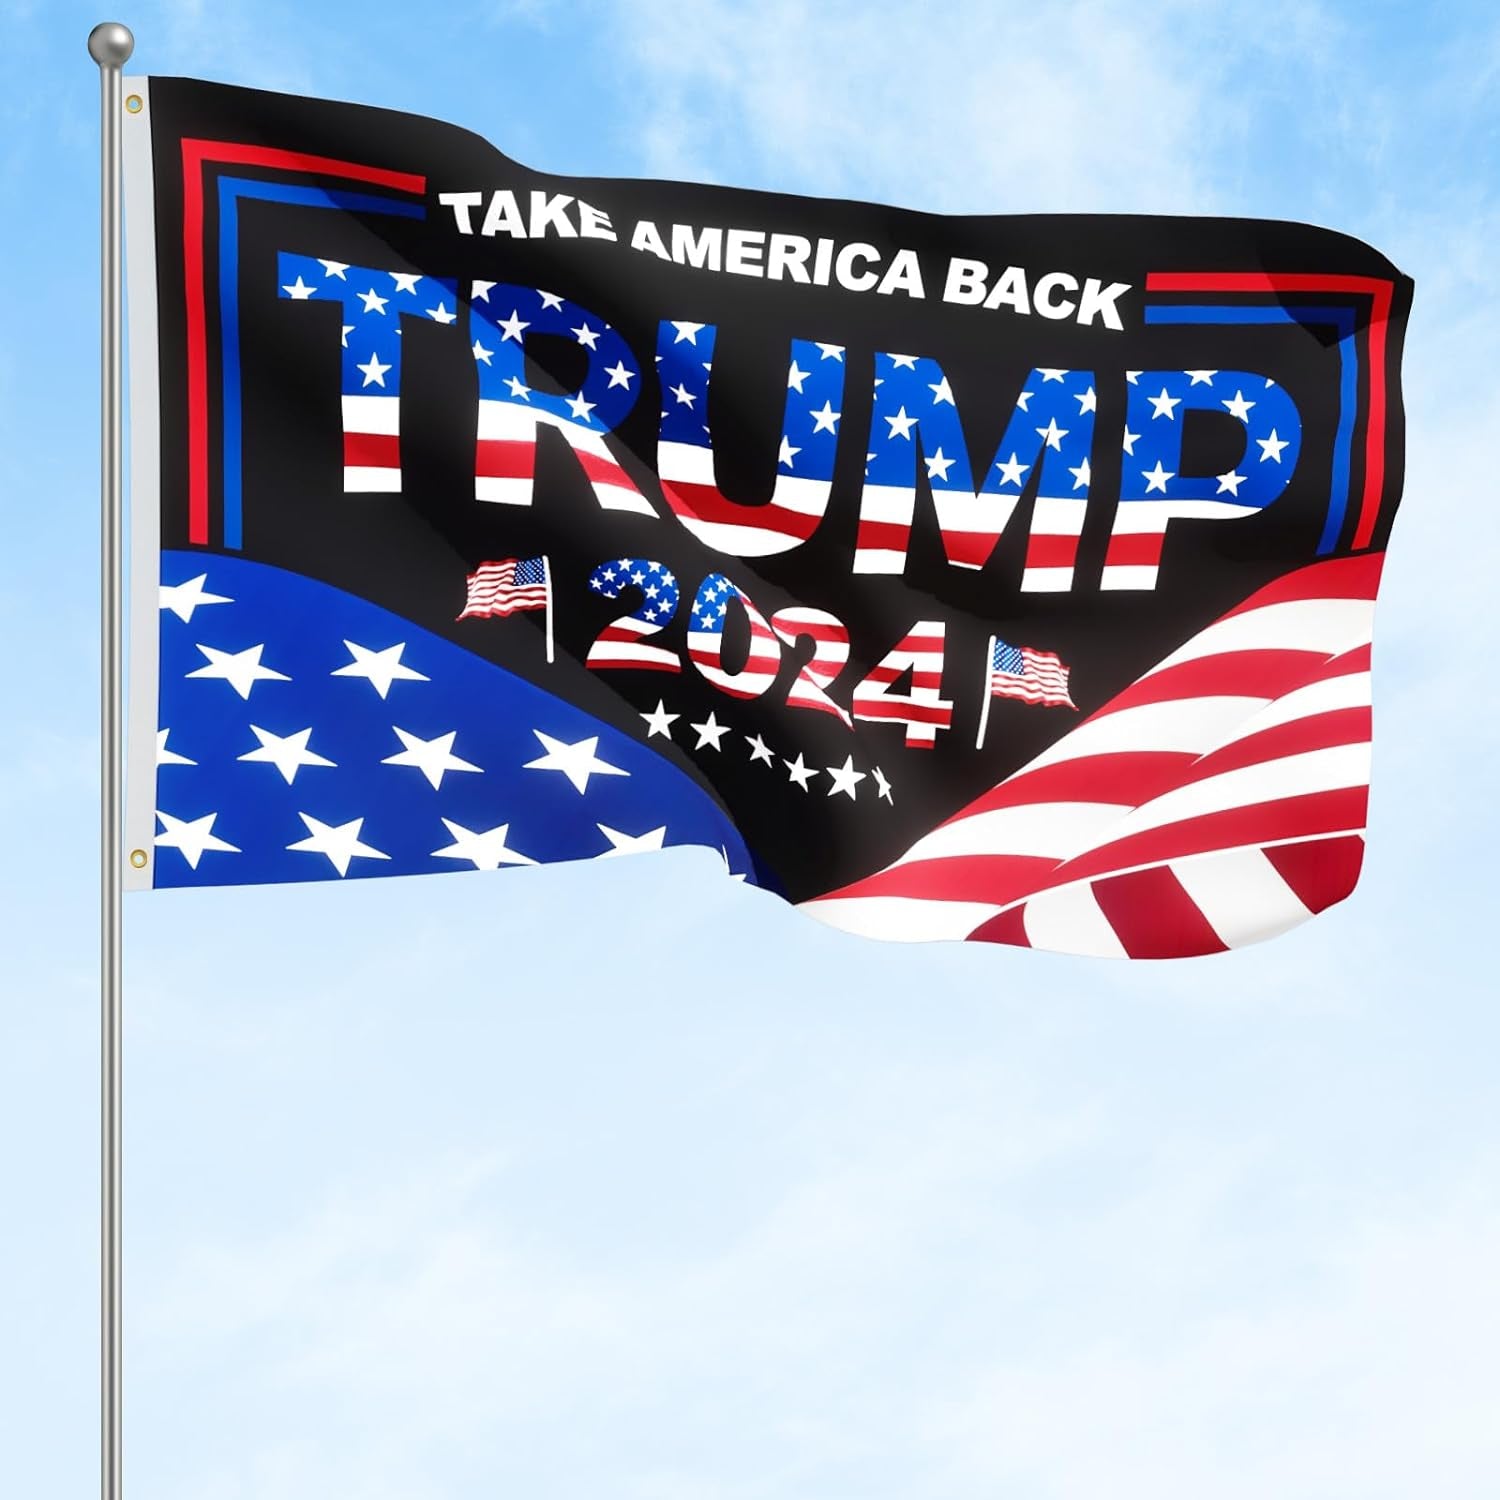 Trump 2024 Flag 3X5 FT President Trump Flag Take America Back Banner Indoor Outdoor 1 Ply with Vivid Patriotic Colors Design UV & Fade Resistant 2 Brass Grommets